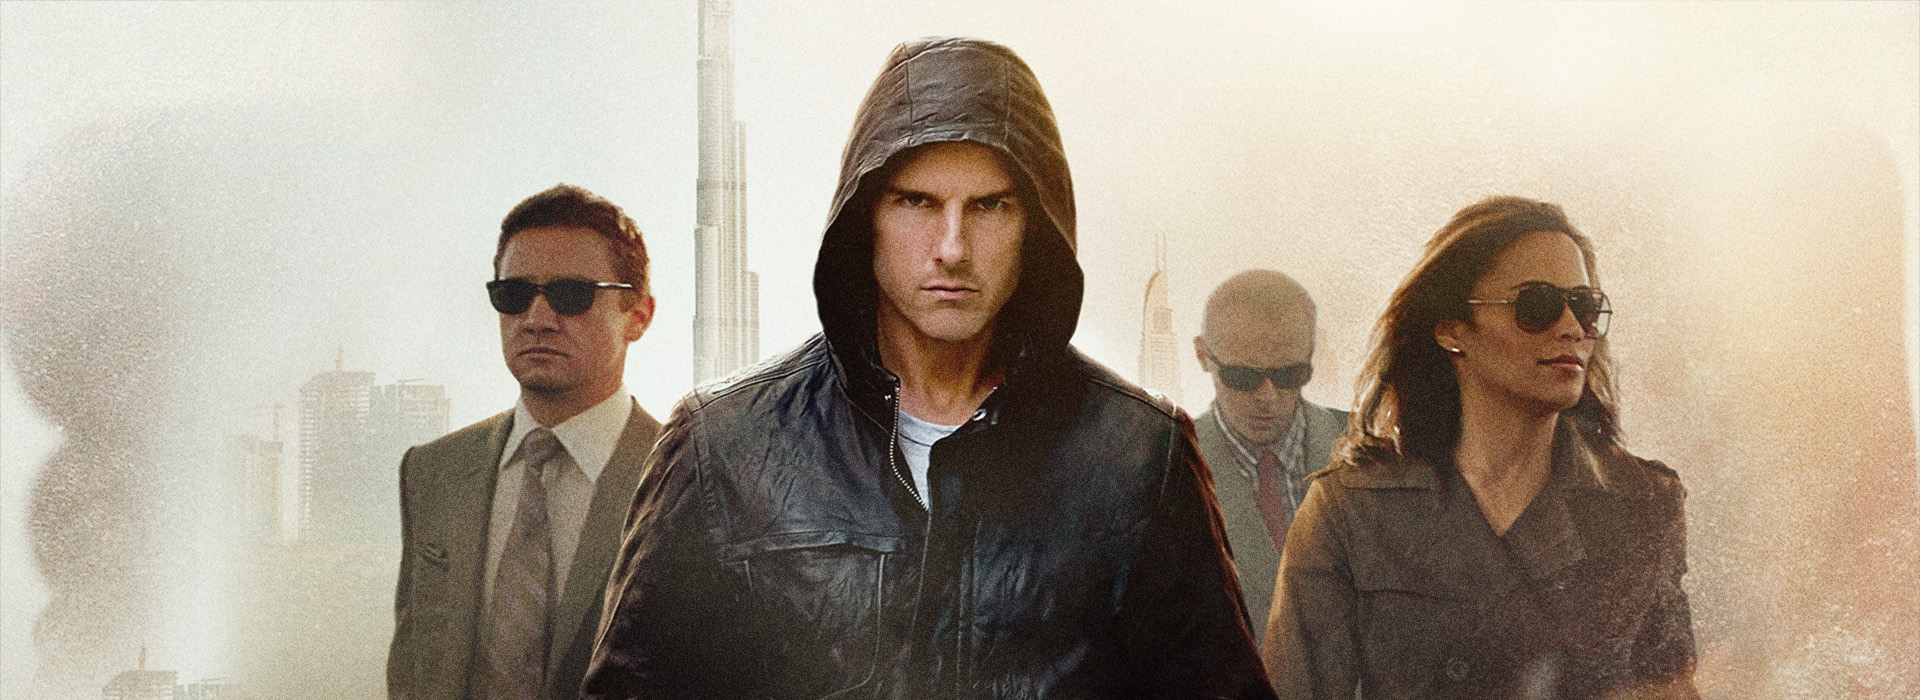 Movie poster Mission: Impossible - Ghost Protocol